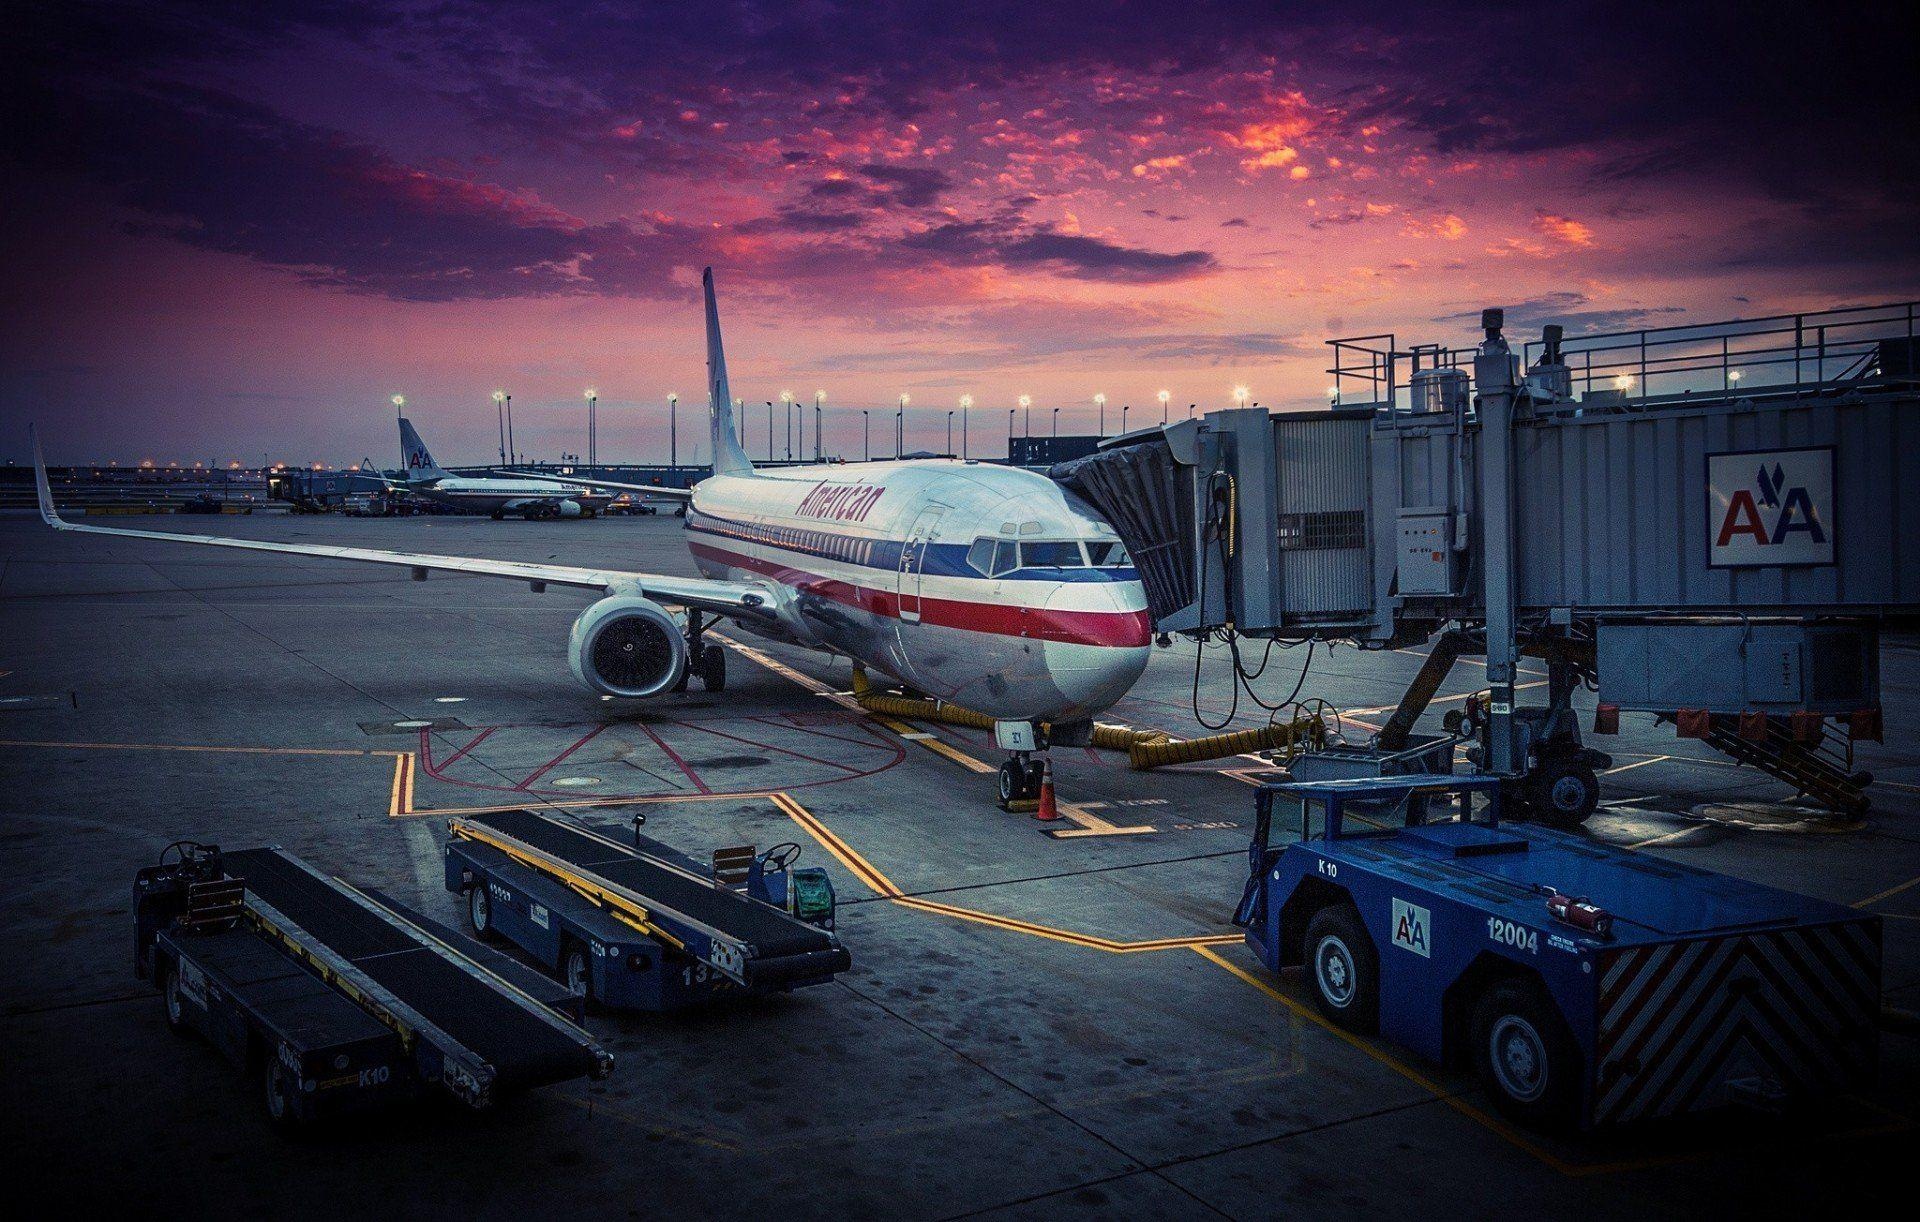 American Airlines, Airline wallpapers, Travel theme, Flight, 1920x1230 HD Desktop